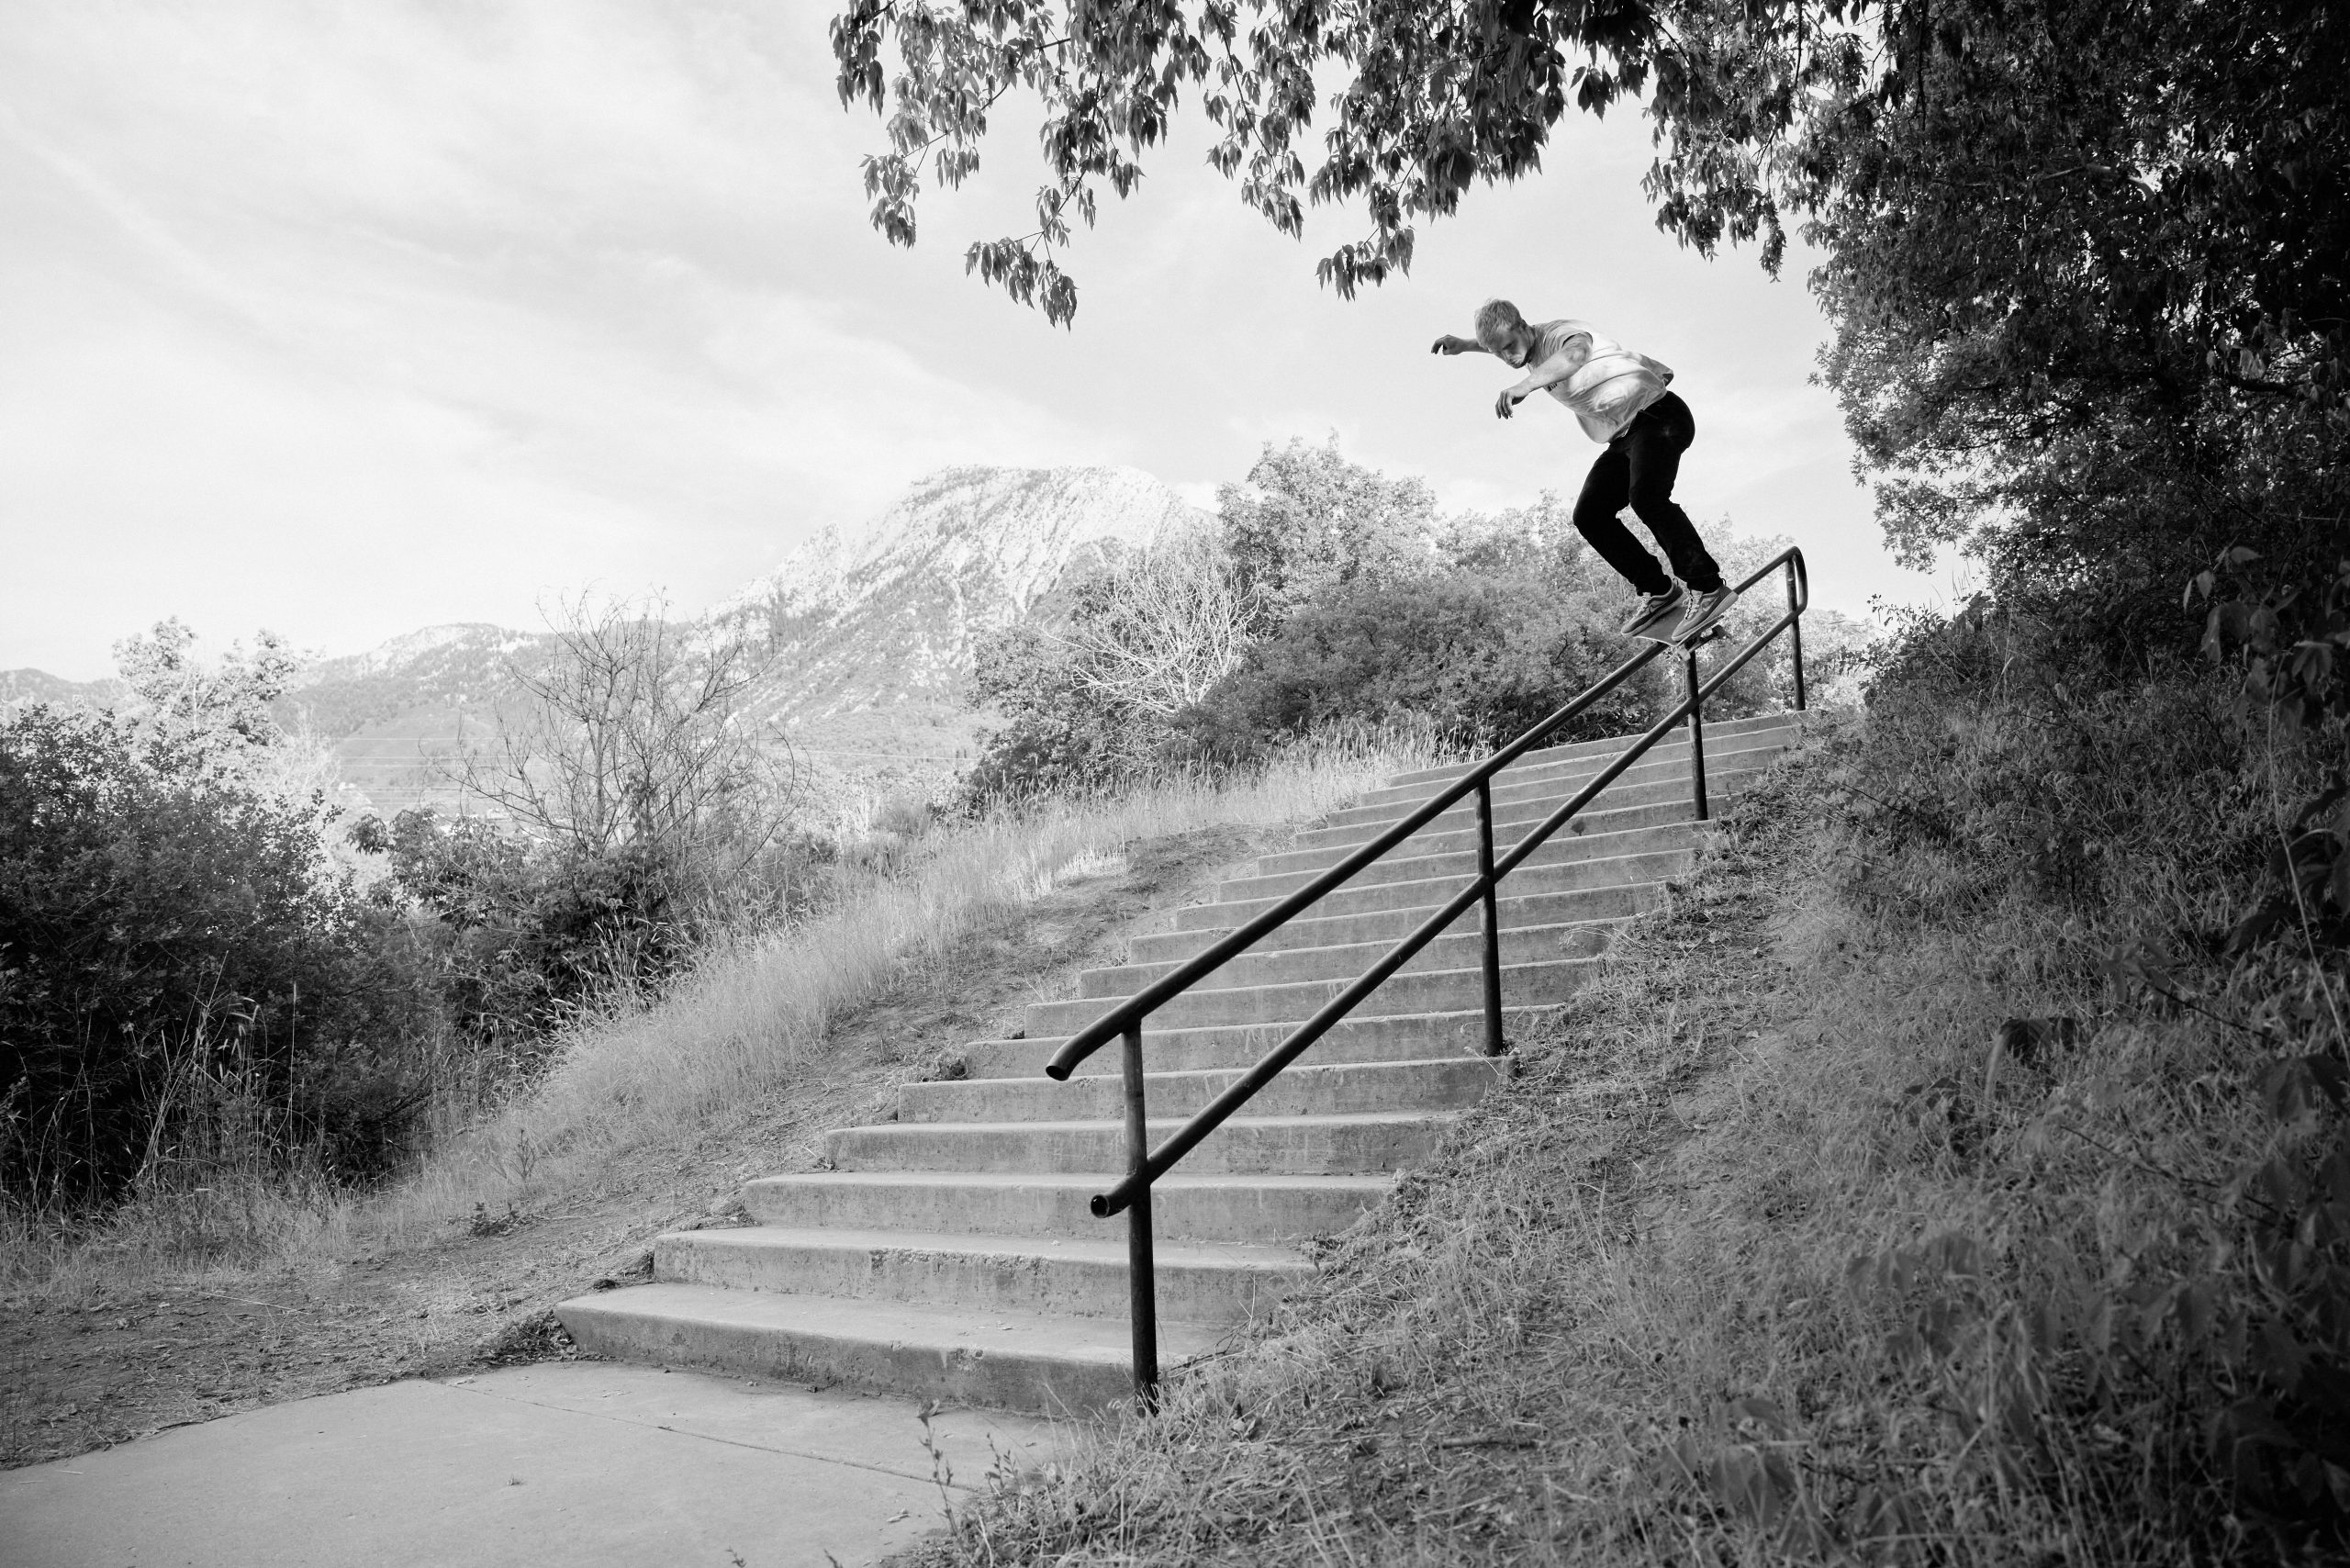 Jacob Taylor – Frontside Fifty-Fifty – Unknown Location, Utah.